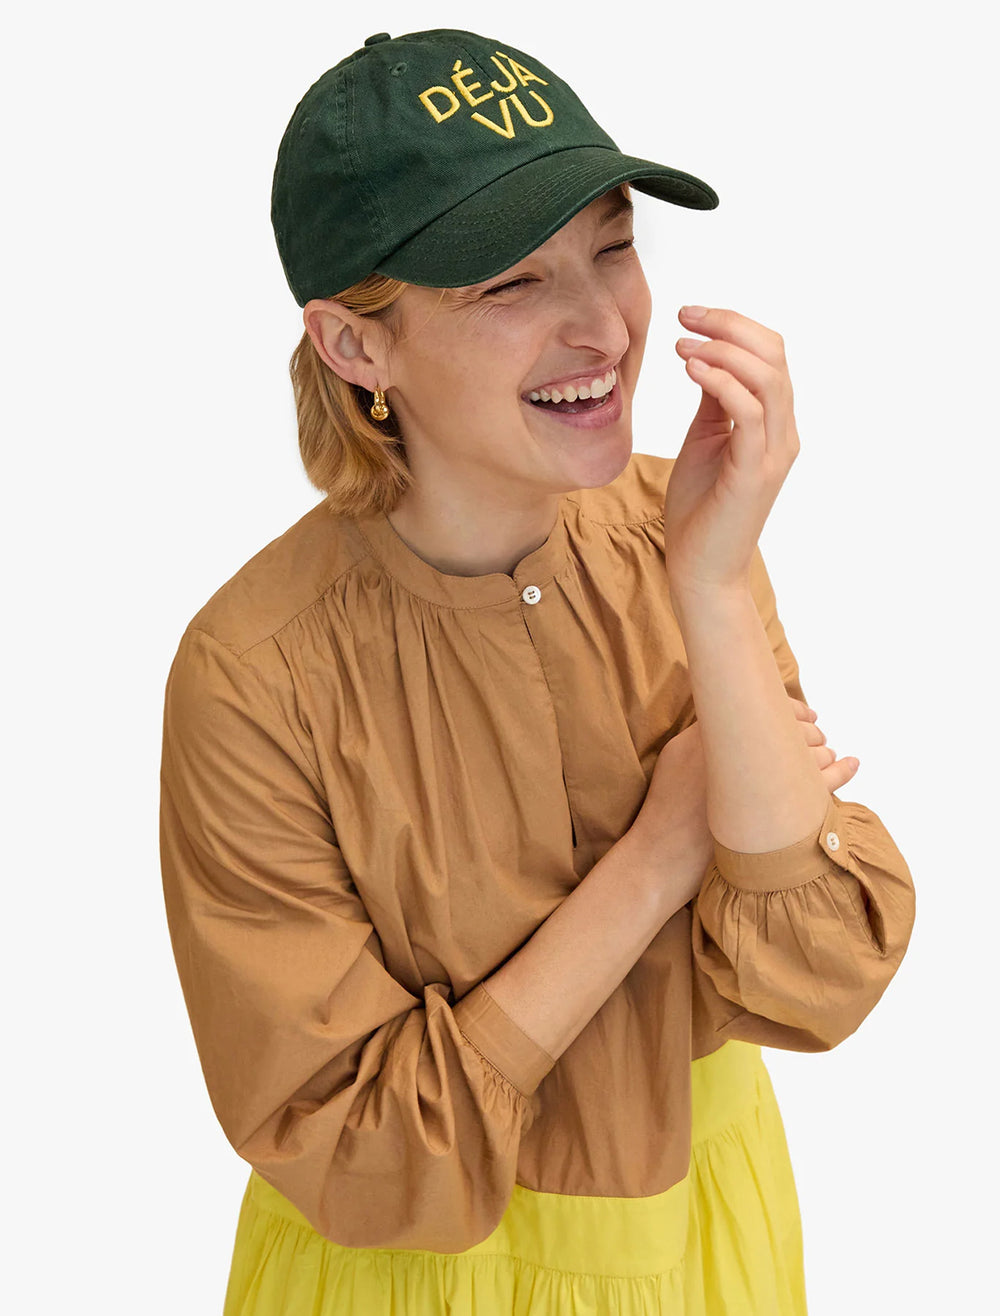 Model wearing Clare V.'s baseball hat in forest and marigold.